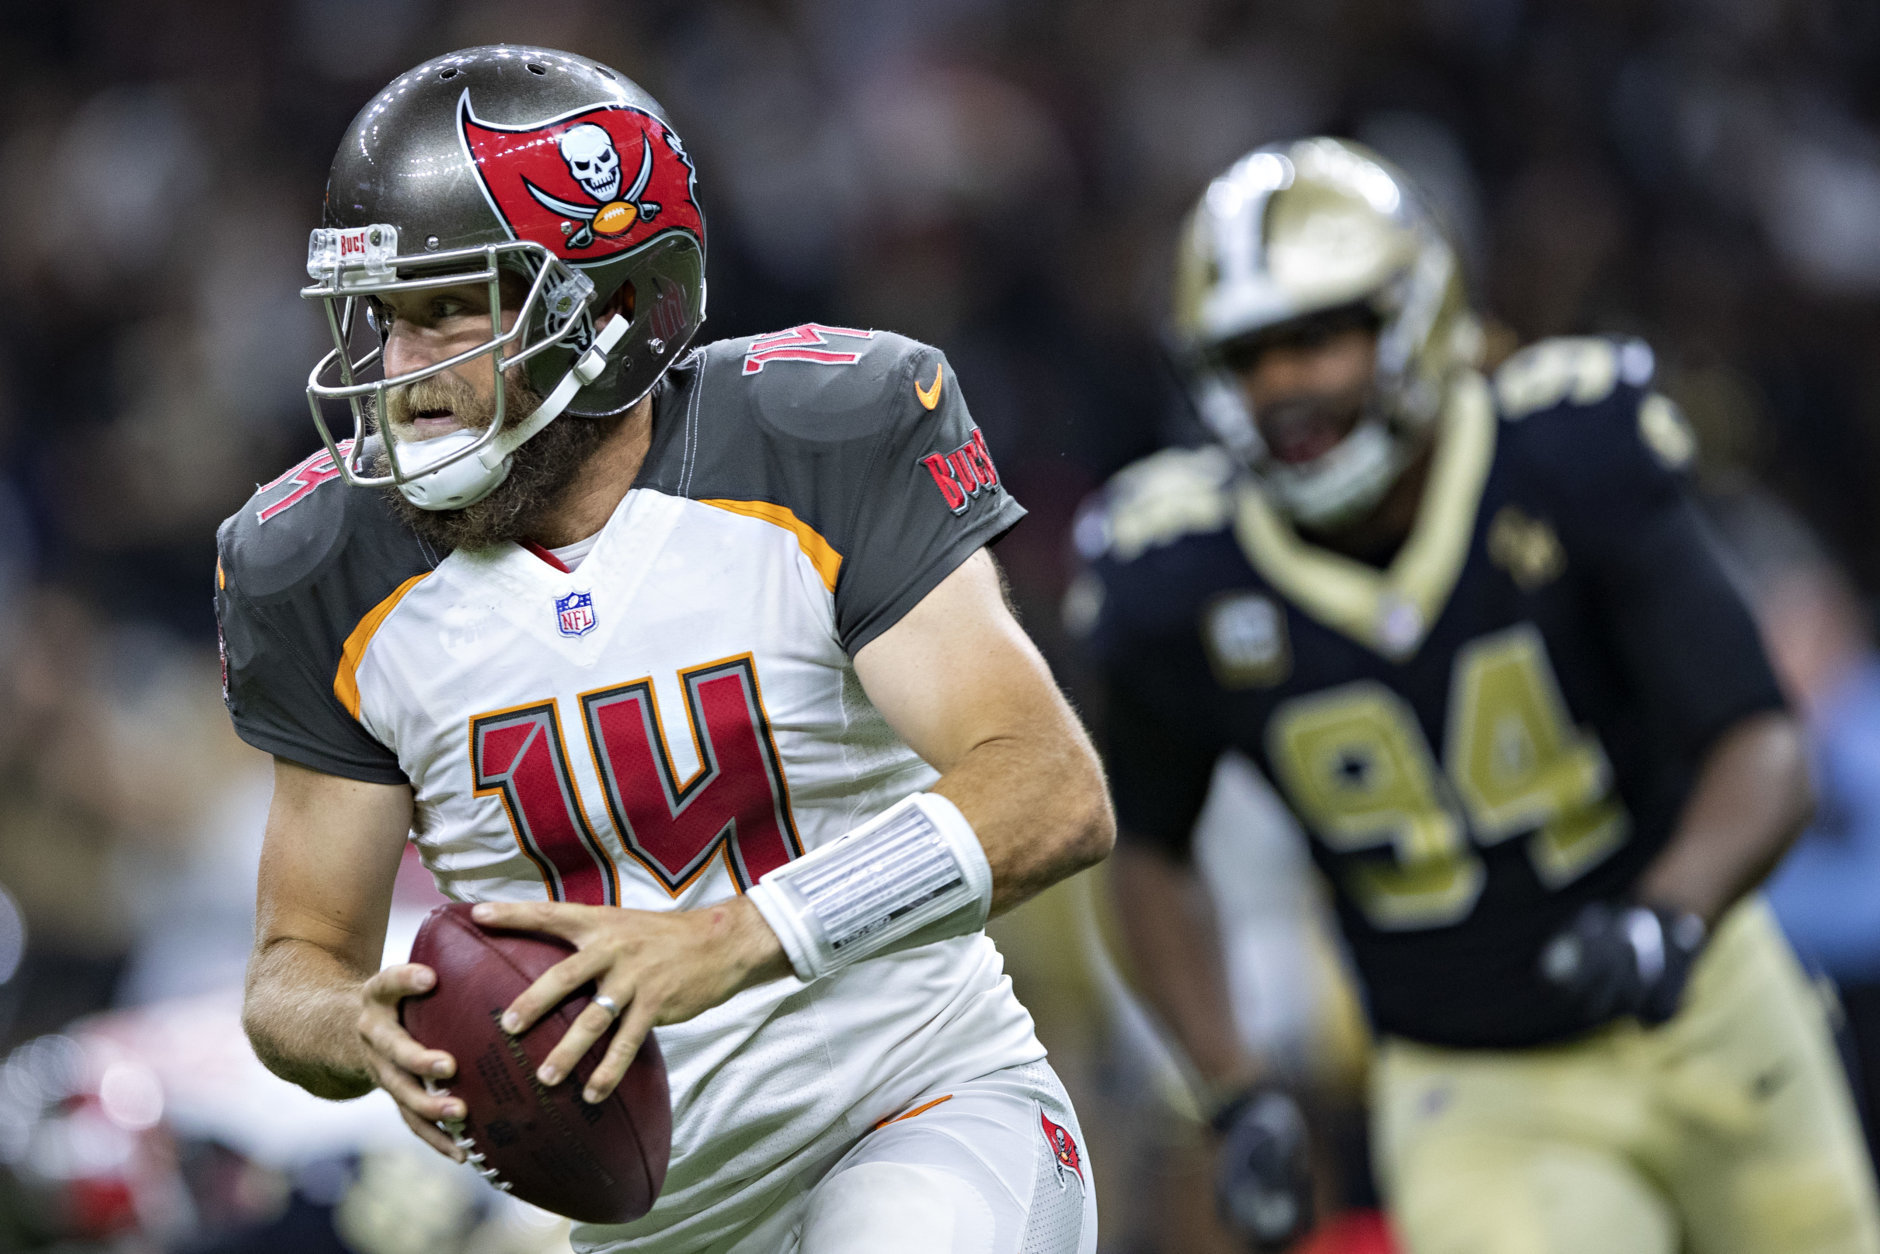 NEW ORLEANS, LA - SEPTEMBER 9:  Ryan Fitzpatrick #14 of the Tampa Bay Buccaneers runs the ball during a game against the New Orleans Saints at Mercedes-Benz Superdome on September 9, 2018 in New Orleans, Louisiana.  The Buccaneers defeated the Saints 48-40.  (Photo by Wesley Hitt/Getty Images)